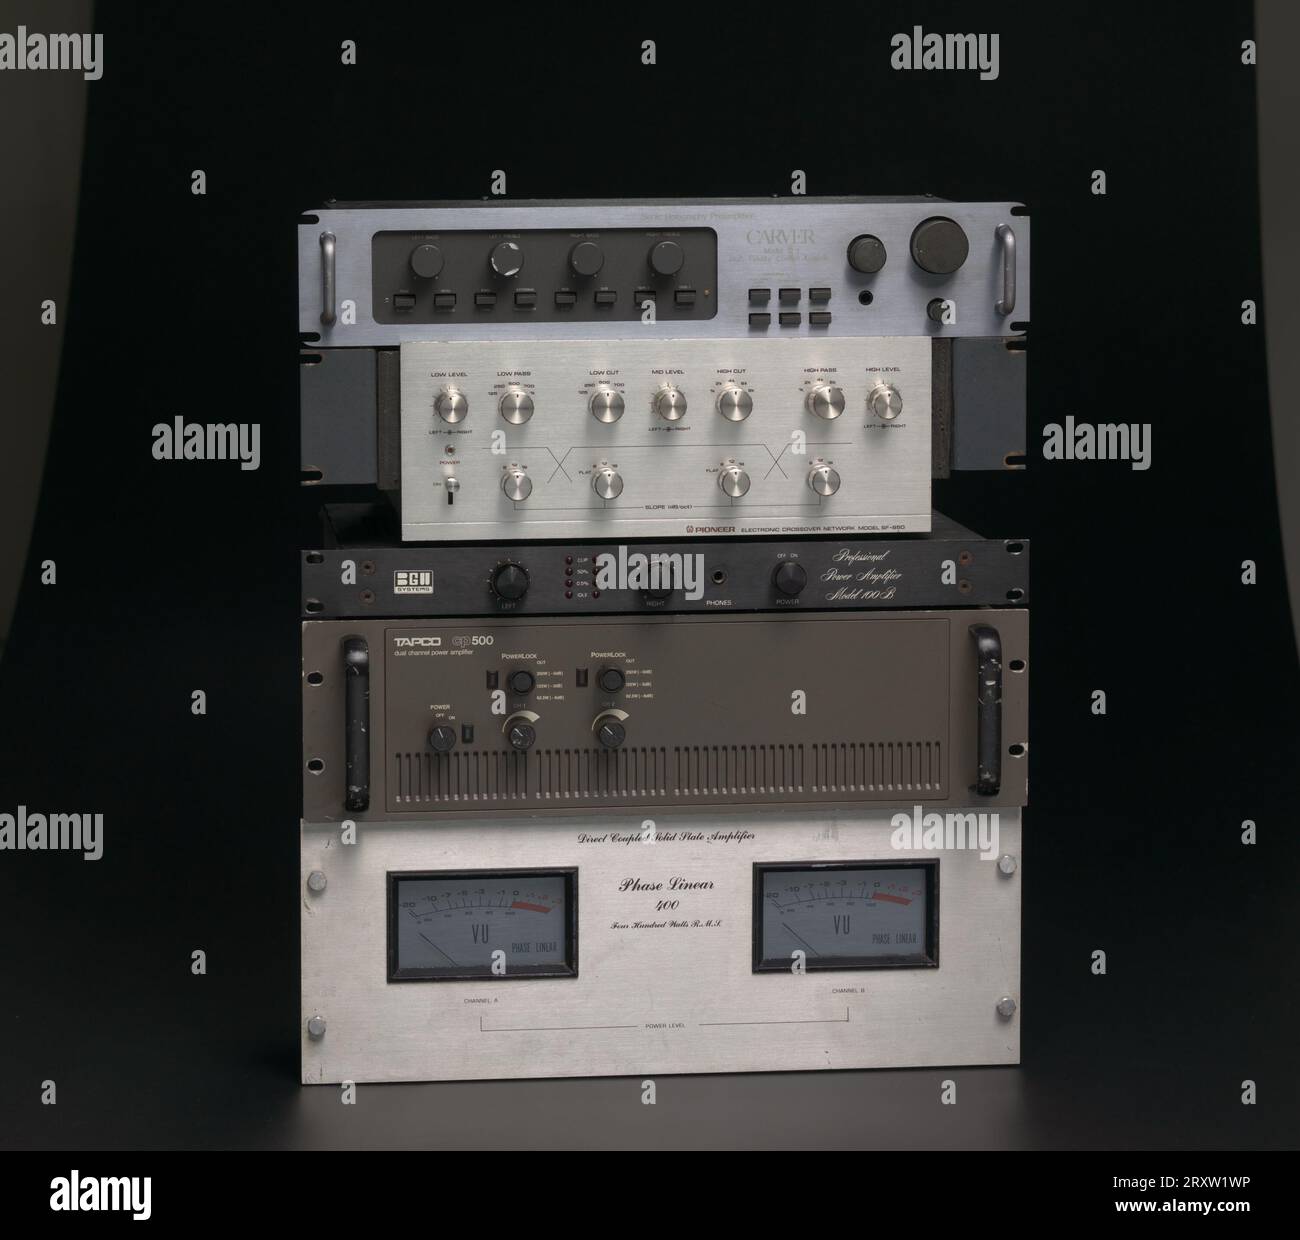 A metal Pioneer Electronic Crossover, Model SF-850 machine. The front of the machine is metal, silver with black type, with two rows of knobs. The top row has seven knobs. Each knob has a name as well as other markings to indicate levels. The names read from left to right: [Low Level / Low Pass / Low Cut / Mid Level / High Cut / High Pass / High Level]. Below the far left, top row knob, there is a power outlet. The bottom row has a switch, as well as four additional knobs. Above and below the bottom row knobs there are lines that form a grid. Black type, centered underneath the knobs, reads: [ Stock Photo